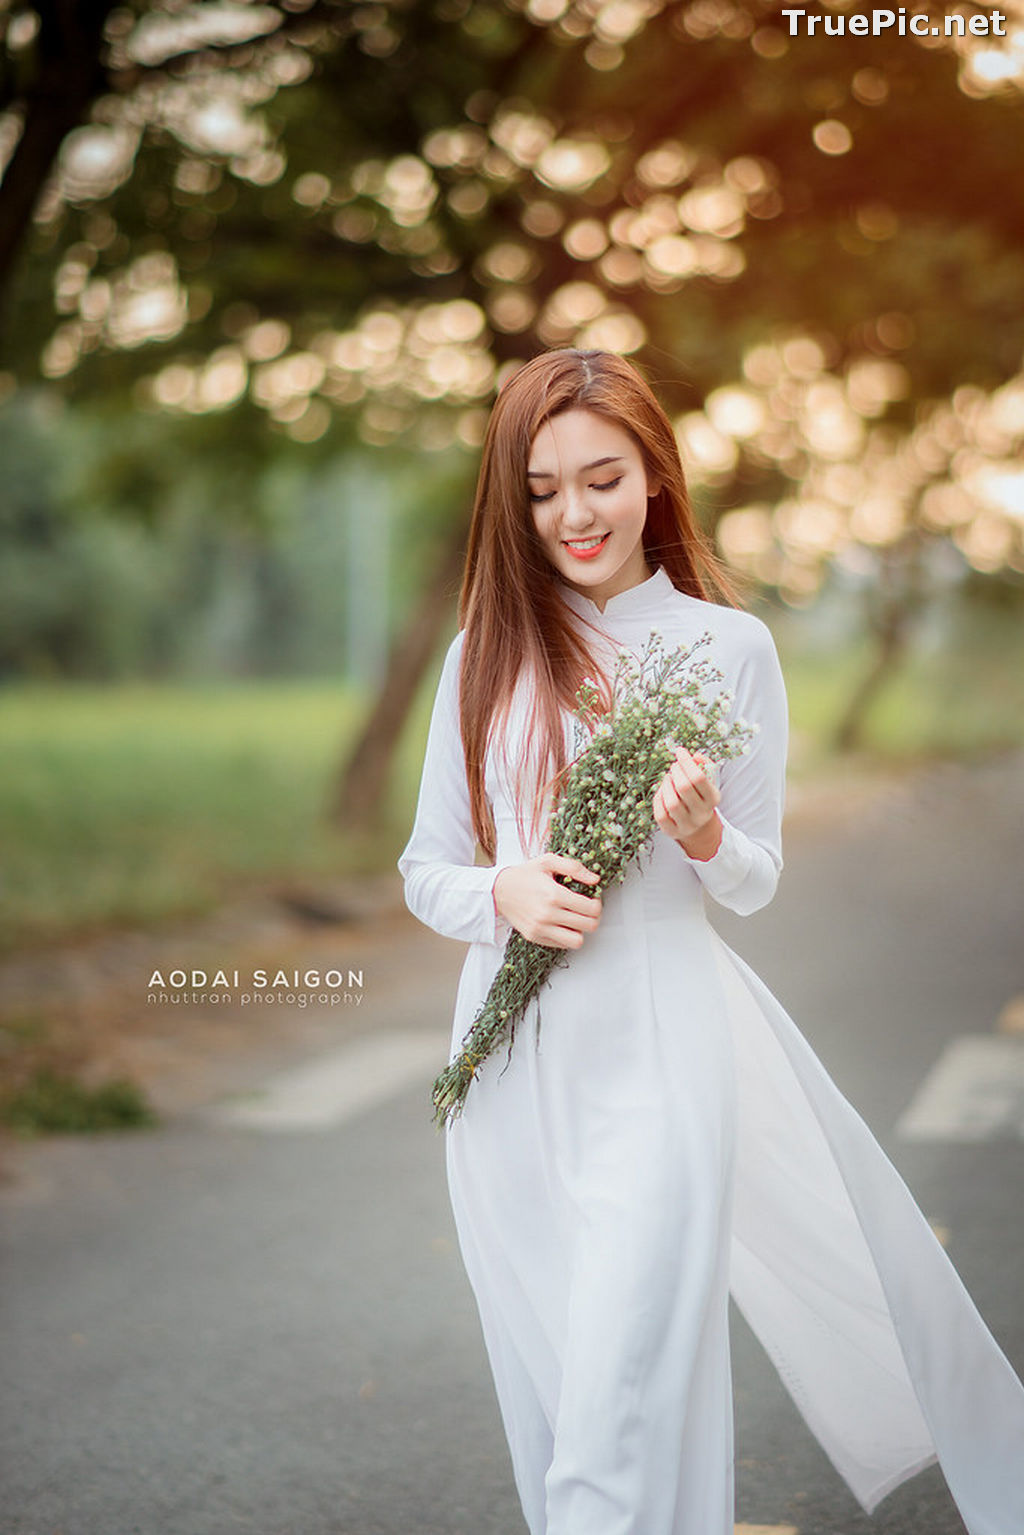 Image The Beauty of Vietnamese Girls with Traditional Dress (Ao Dai) #5 - TruePic.net - Picture-53